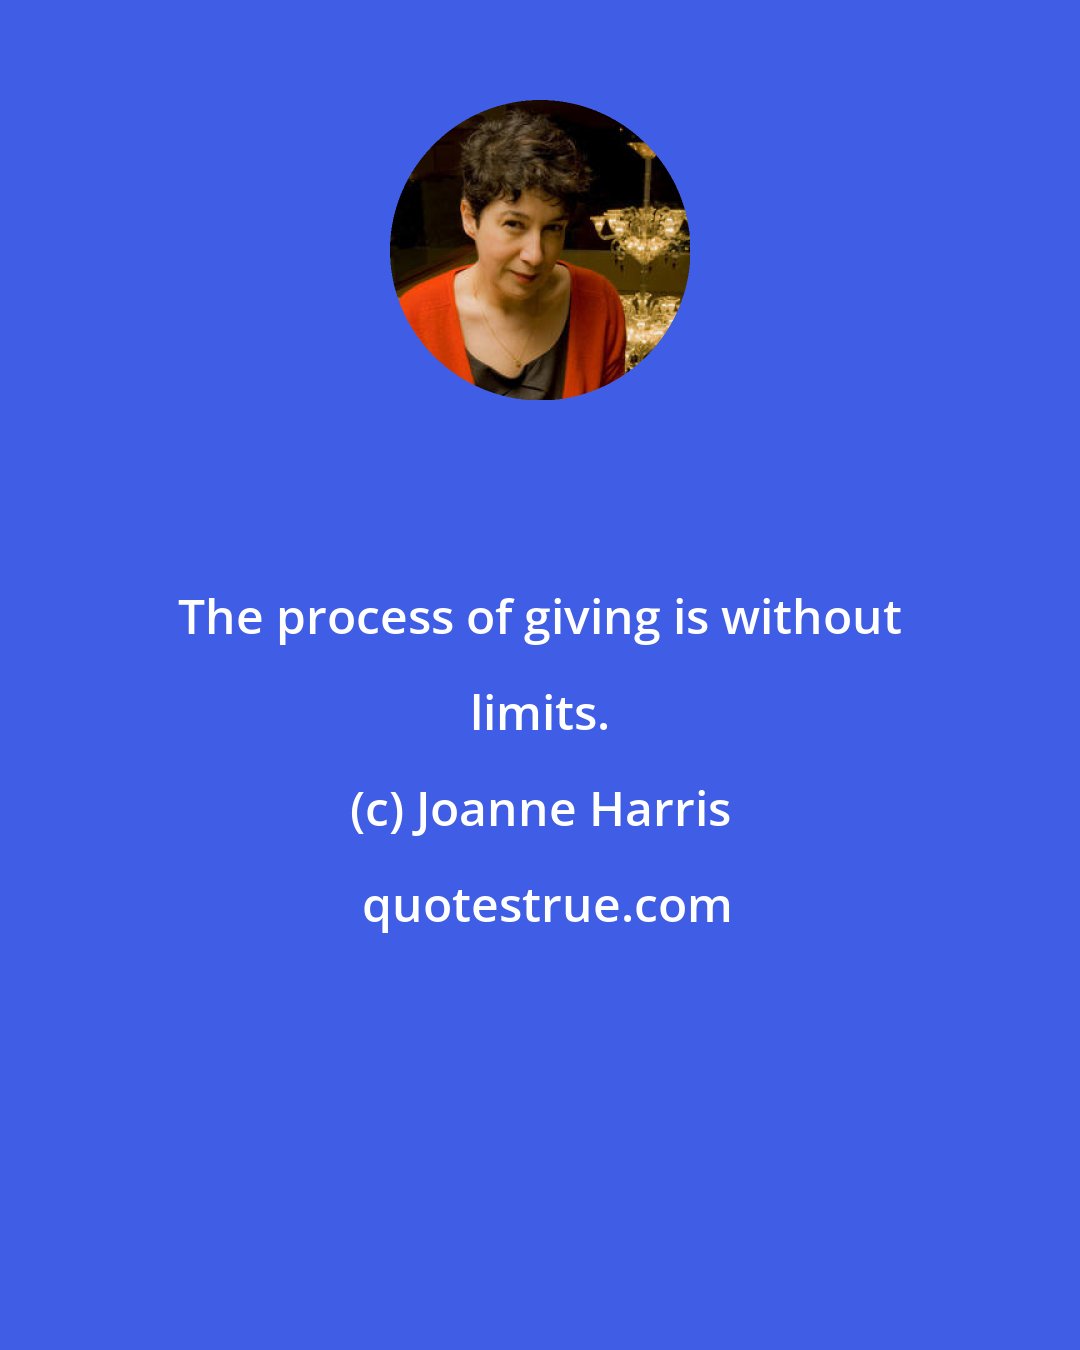 Joanne Harris: The process of giving is without limits.